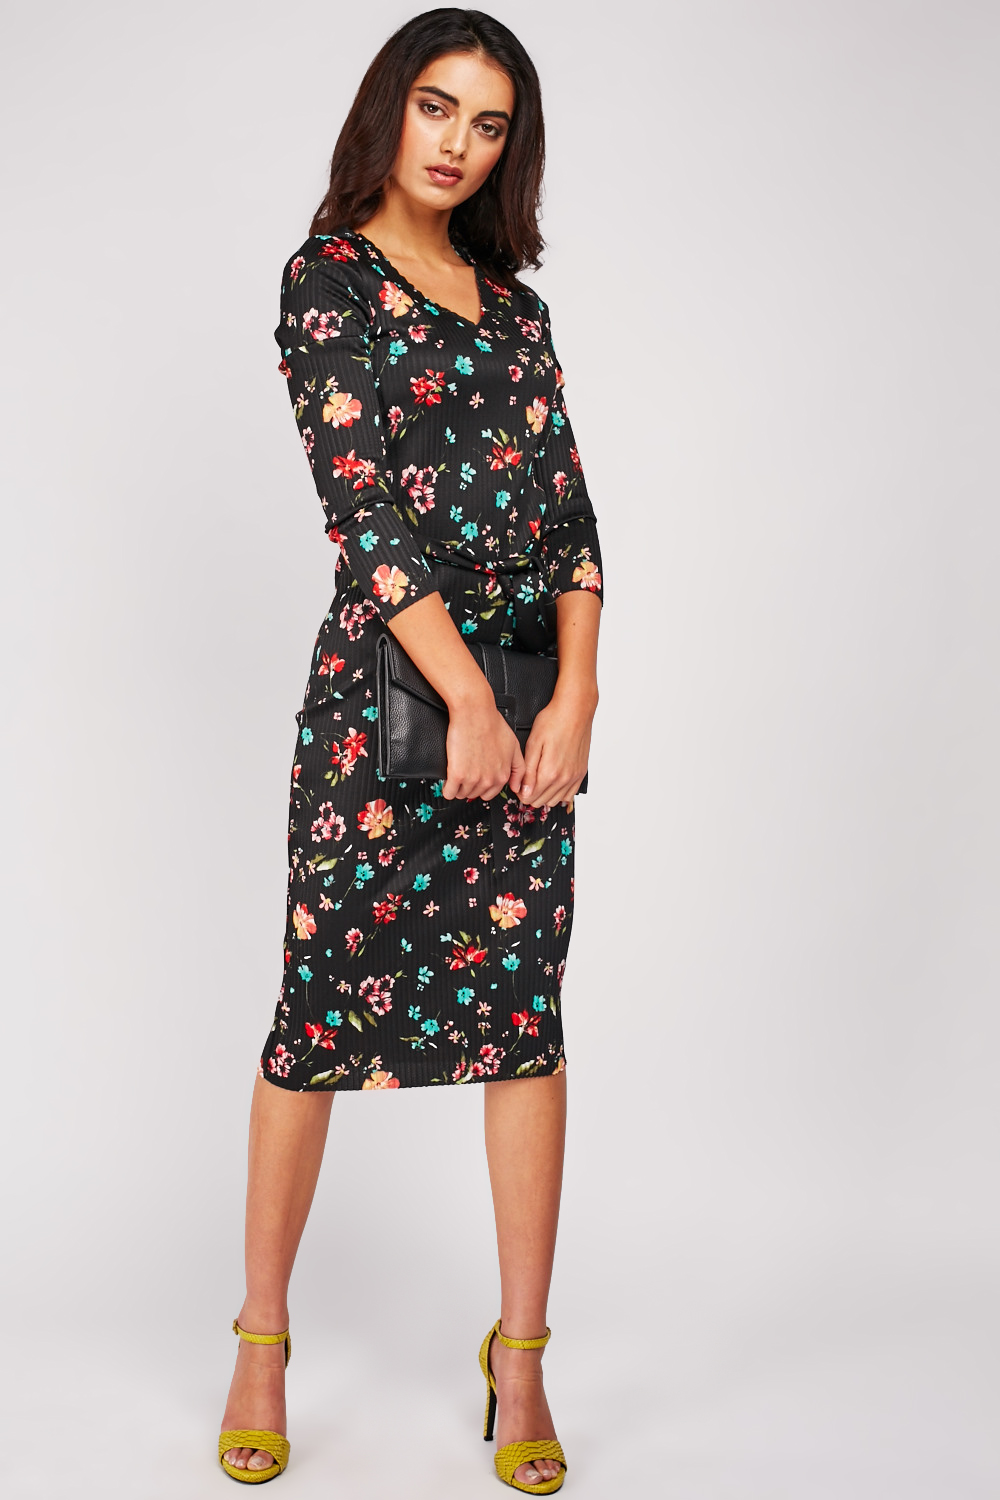 Ribbed Floral Bodycon Dress - Just $7